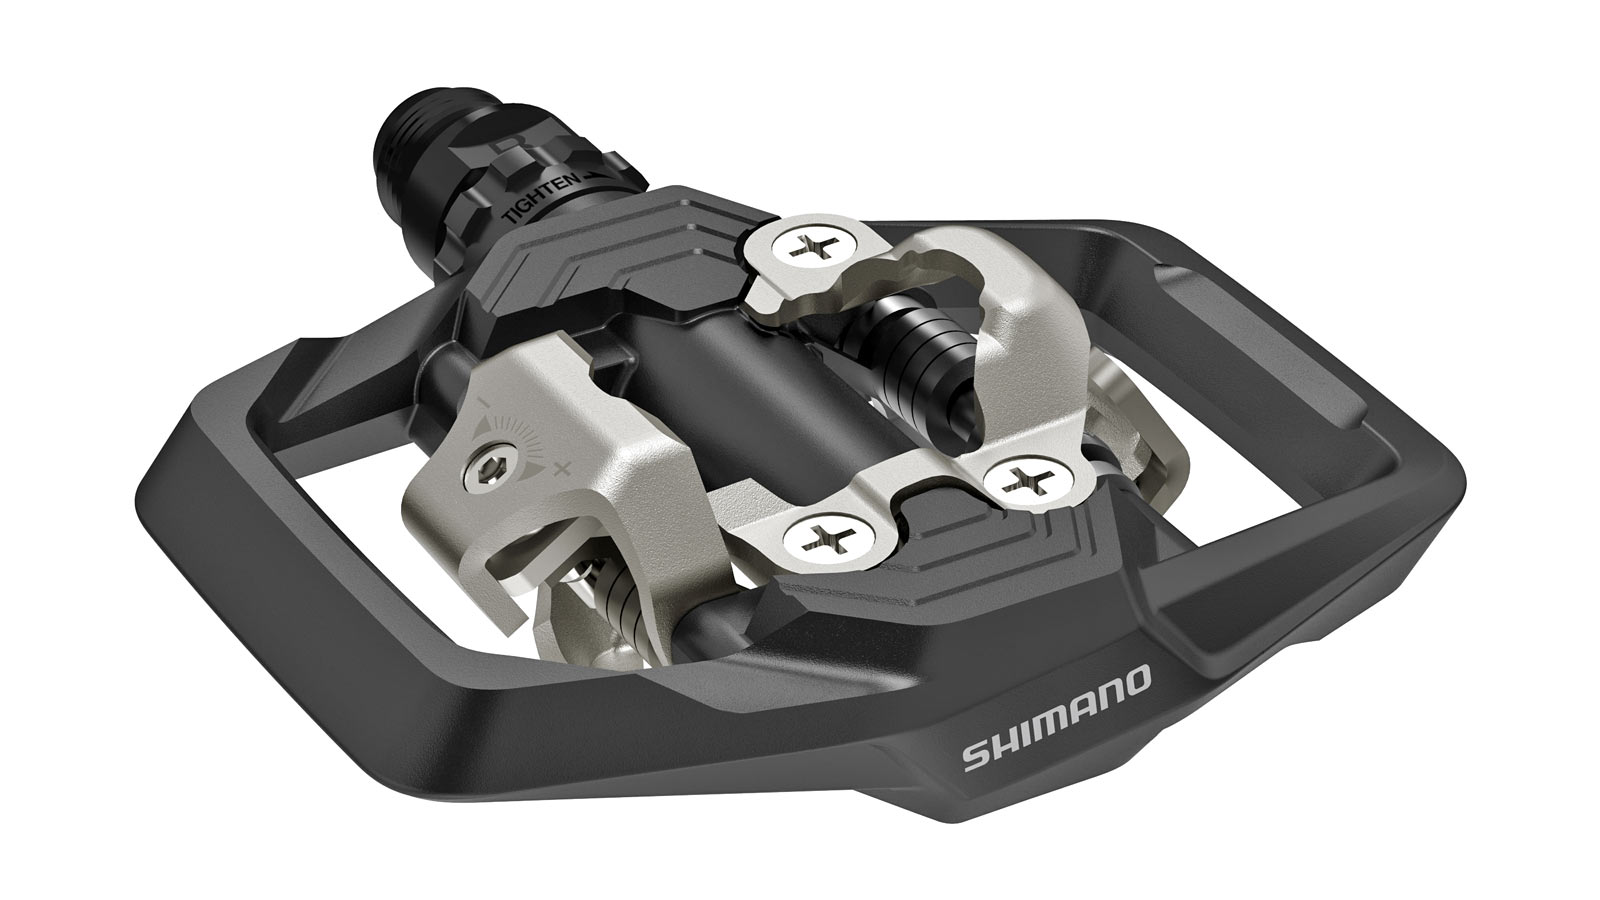 Shimano SLX-level ME700 clipless trail pedals